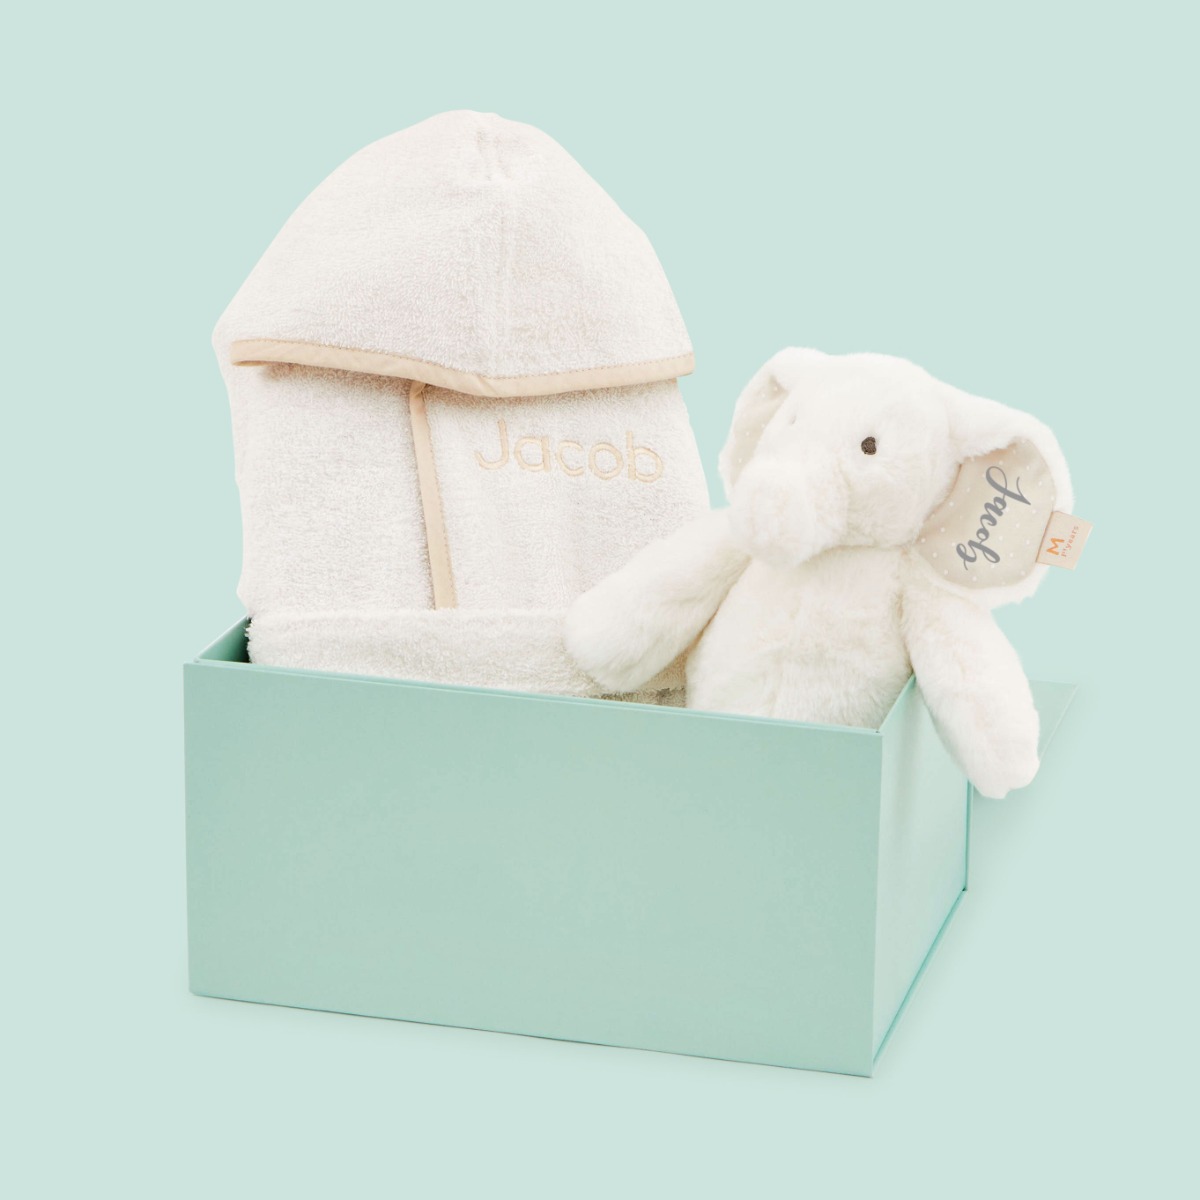 Personalised White Towelling Robe & Soft Toy Set